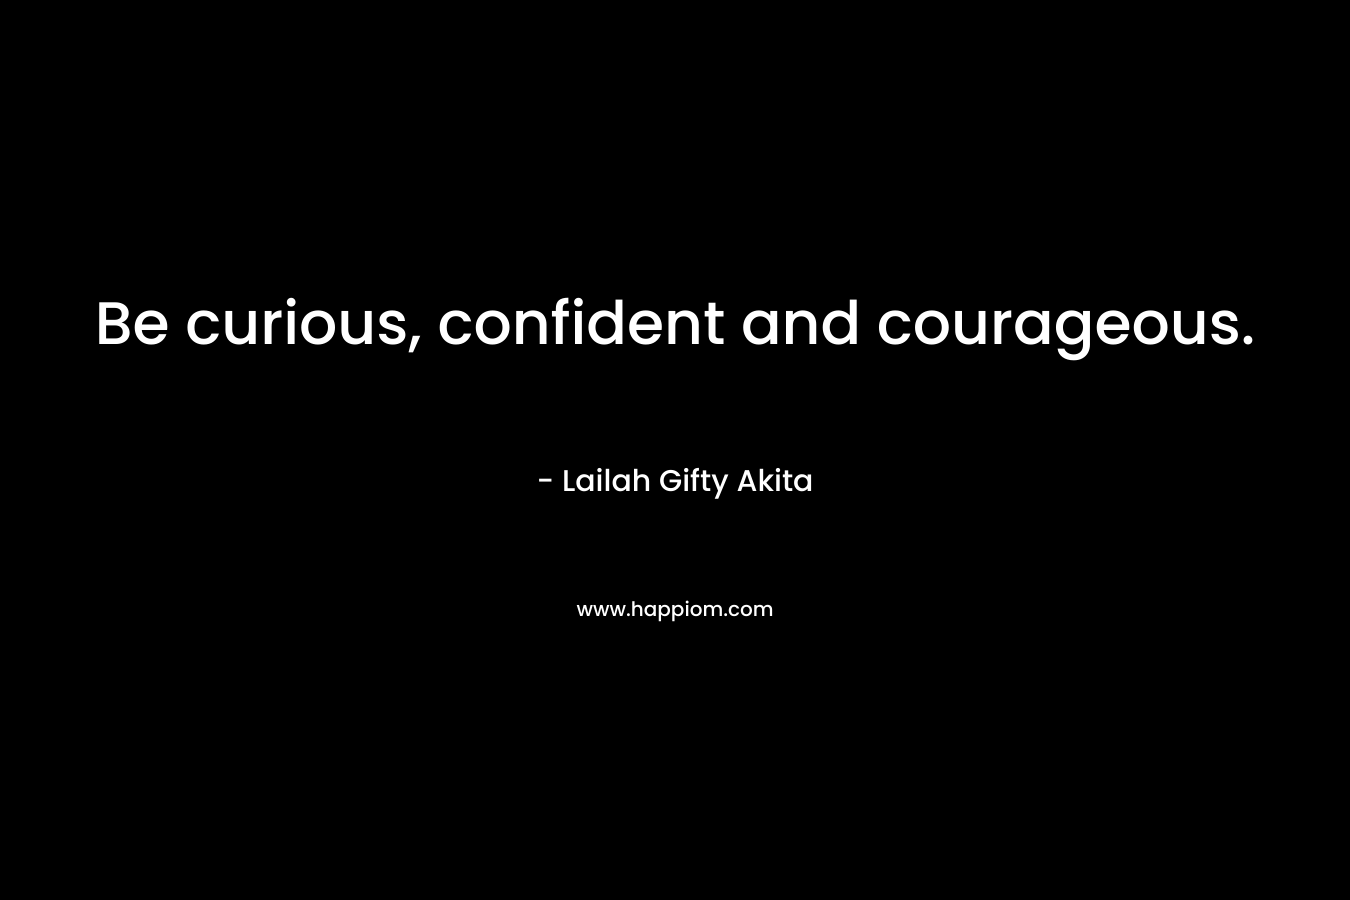 Be curious, confident and courageous.